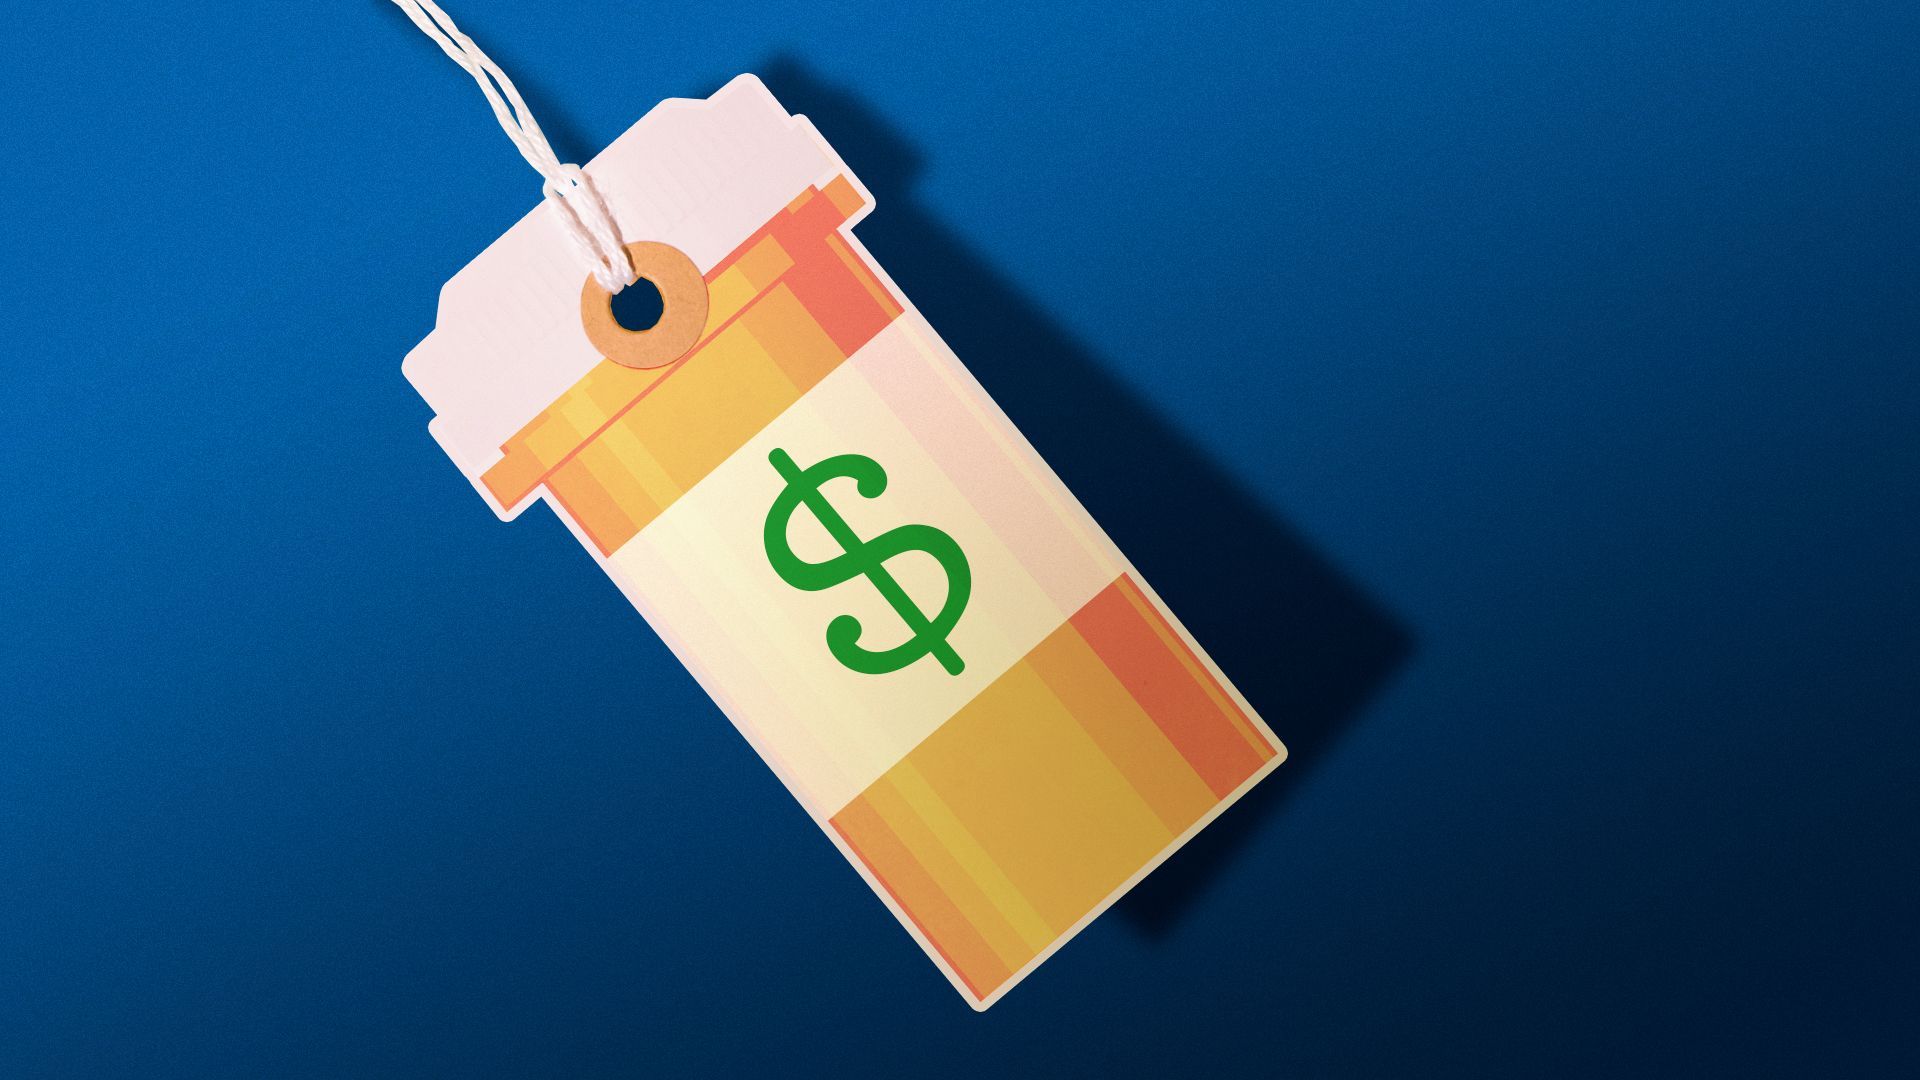 Illustration of a price tag shaped and colored like a prescription pill bottle